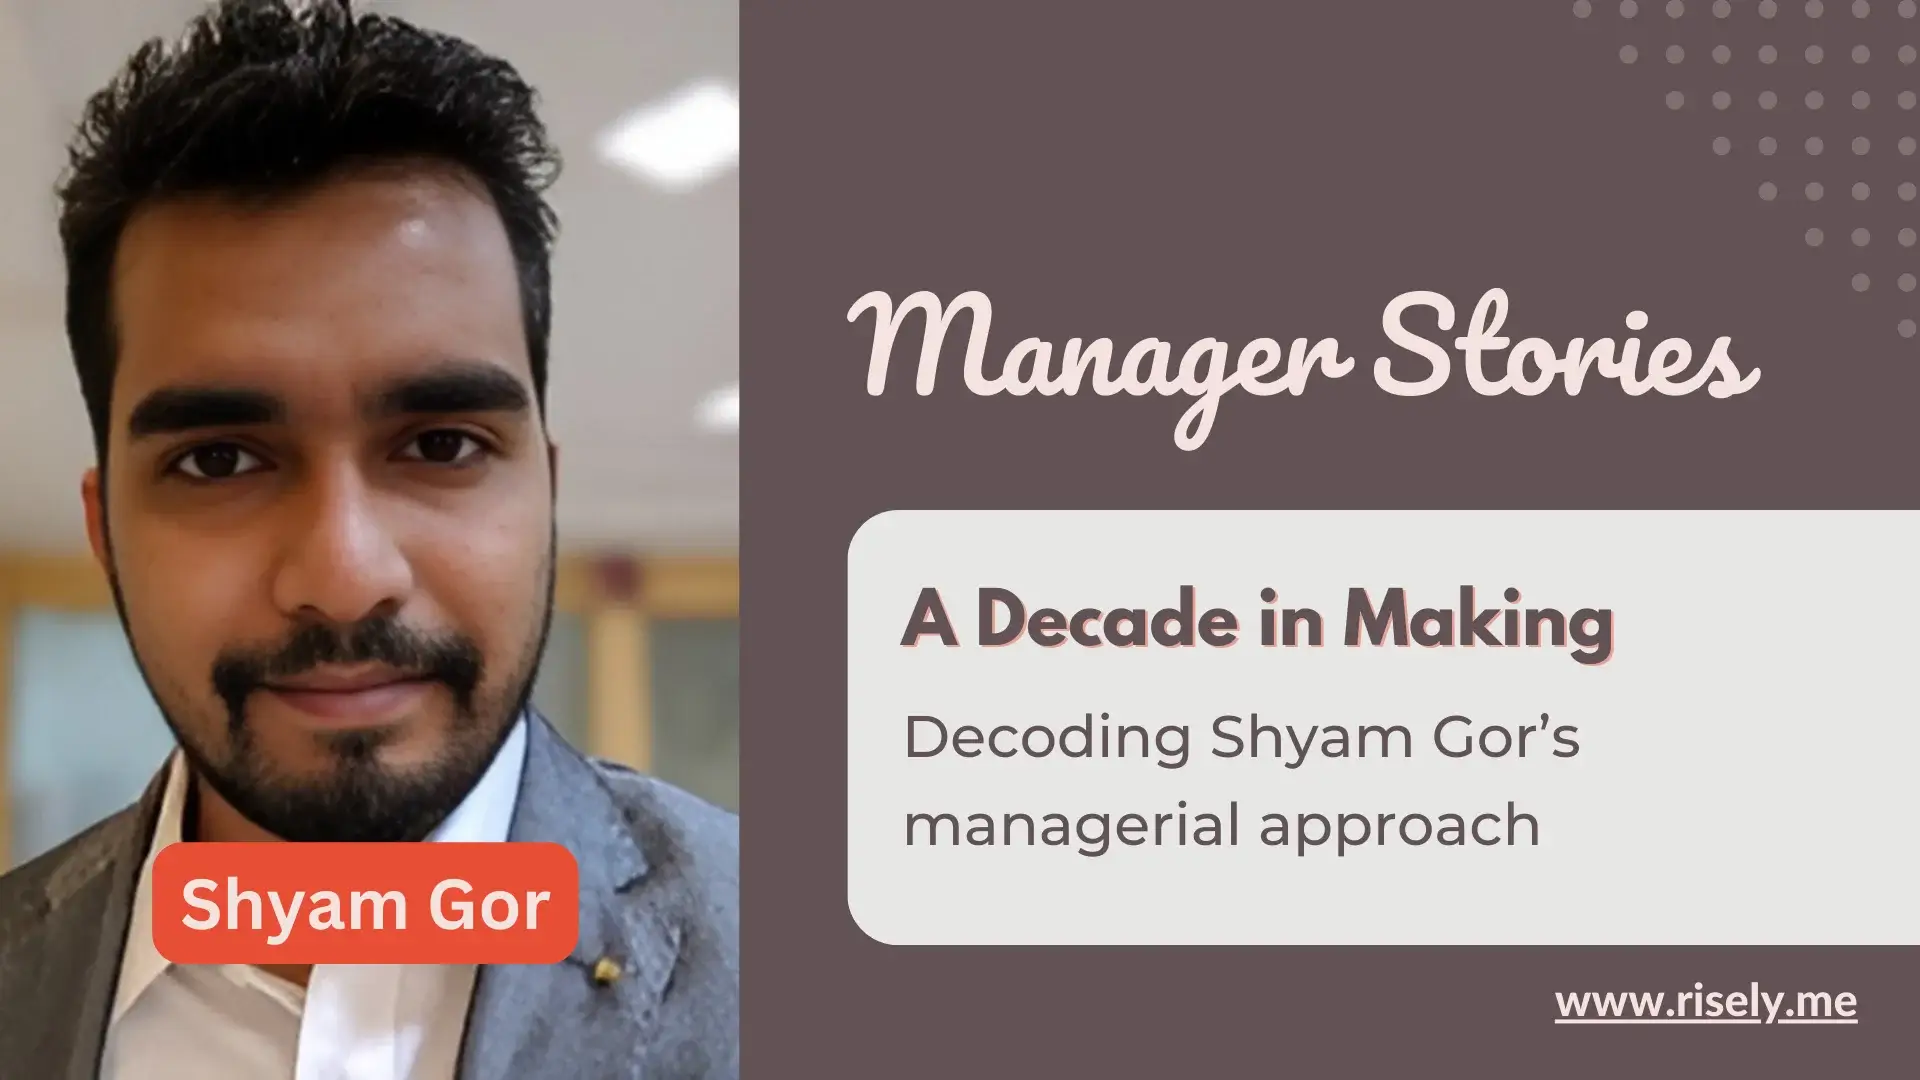 Shyam Gor - manager story featured image on Risely